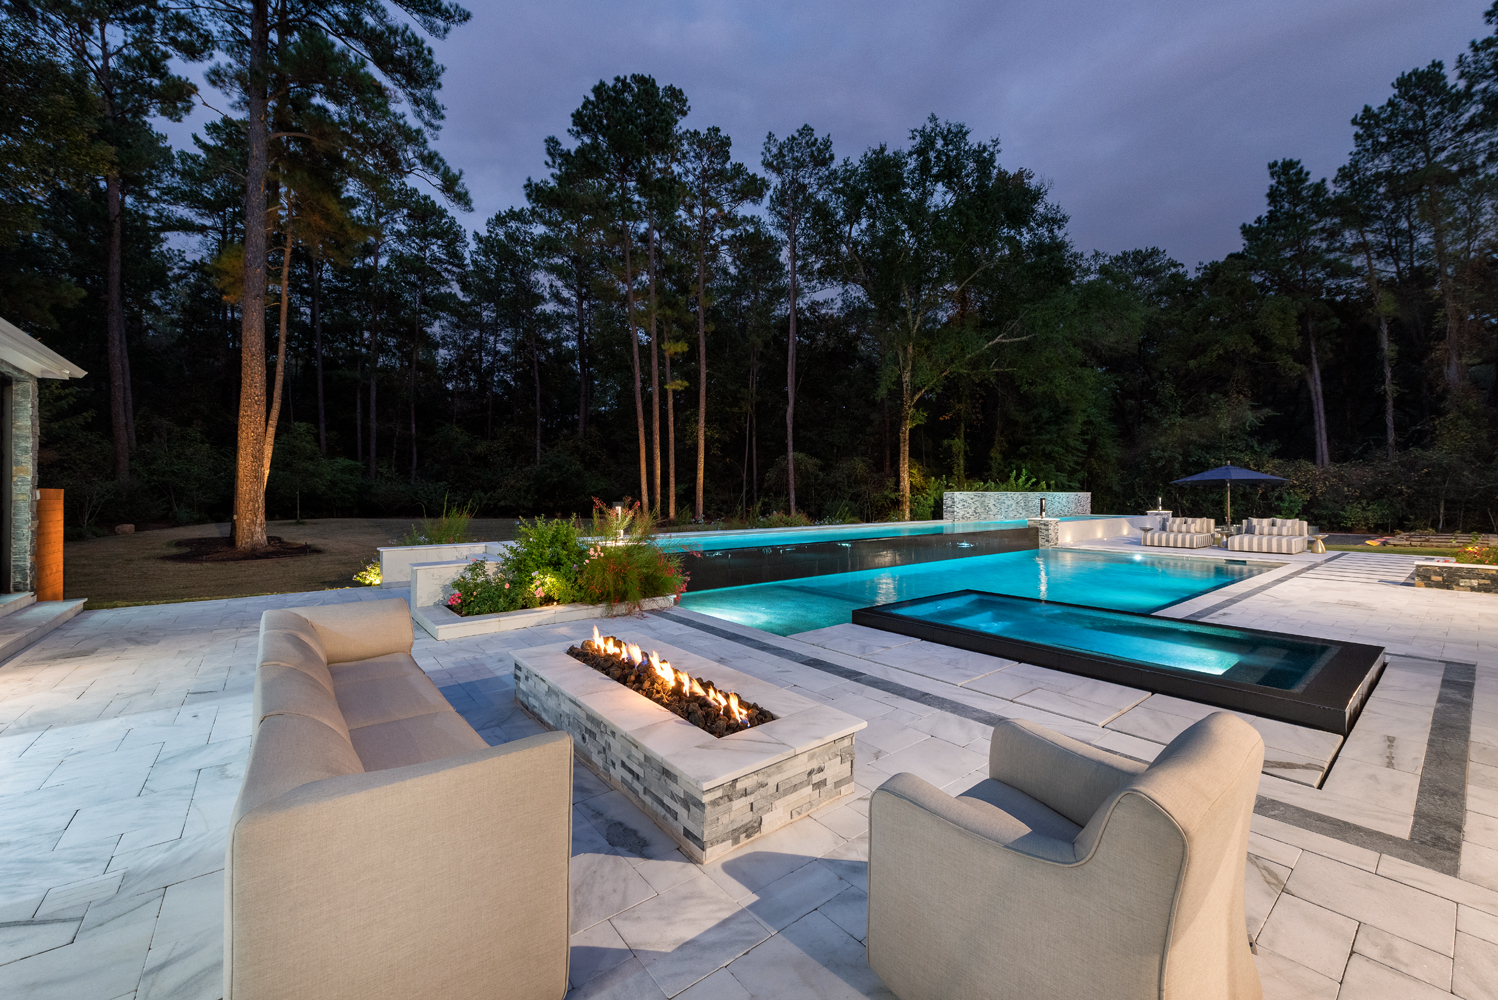 an elegant pool and patio at night